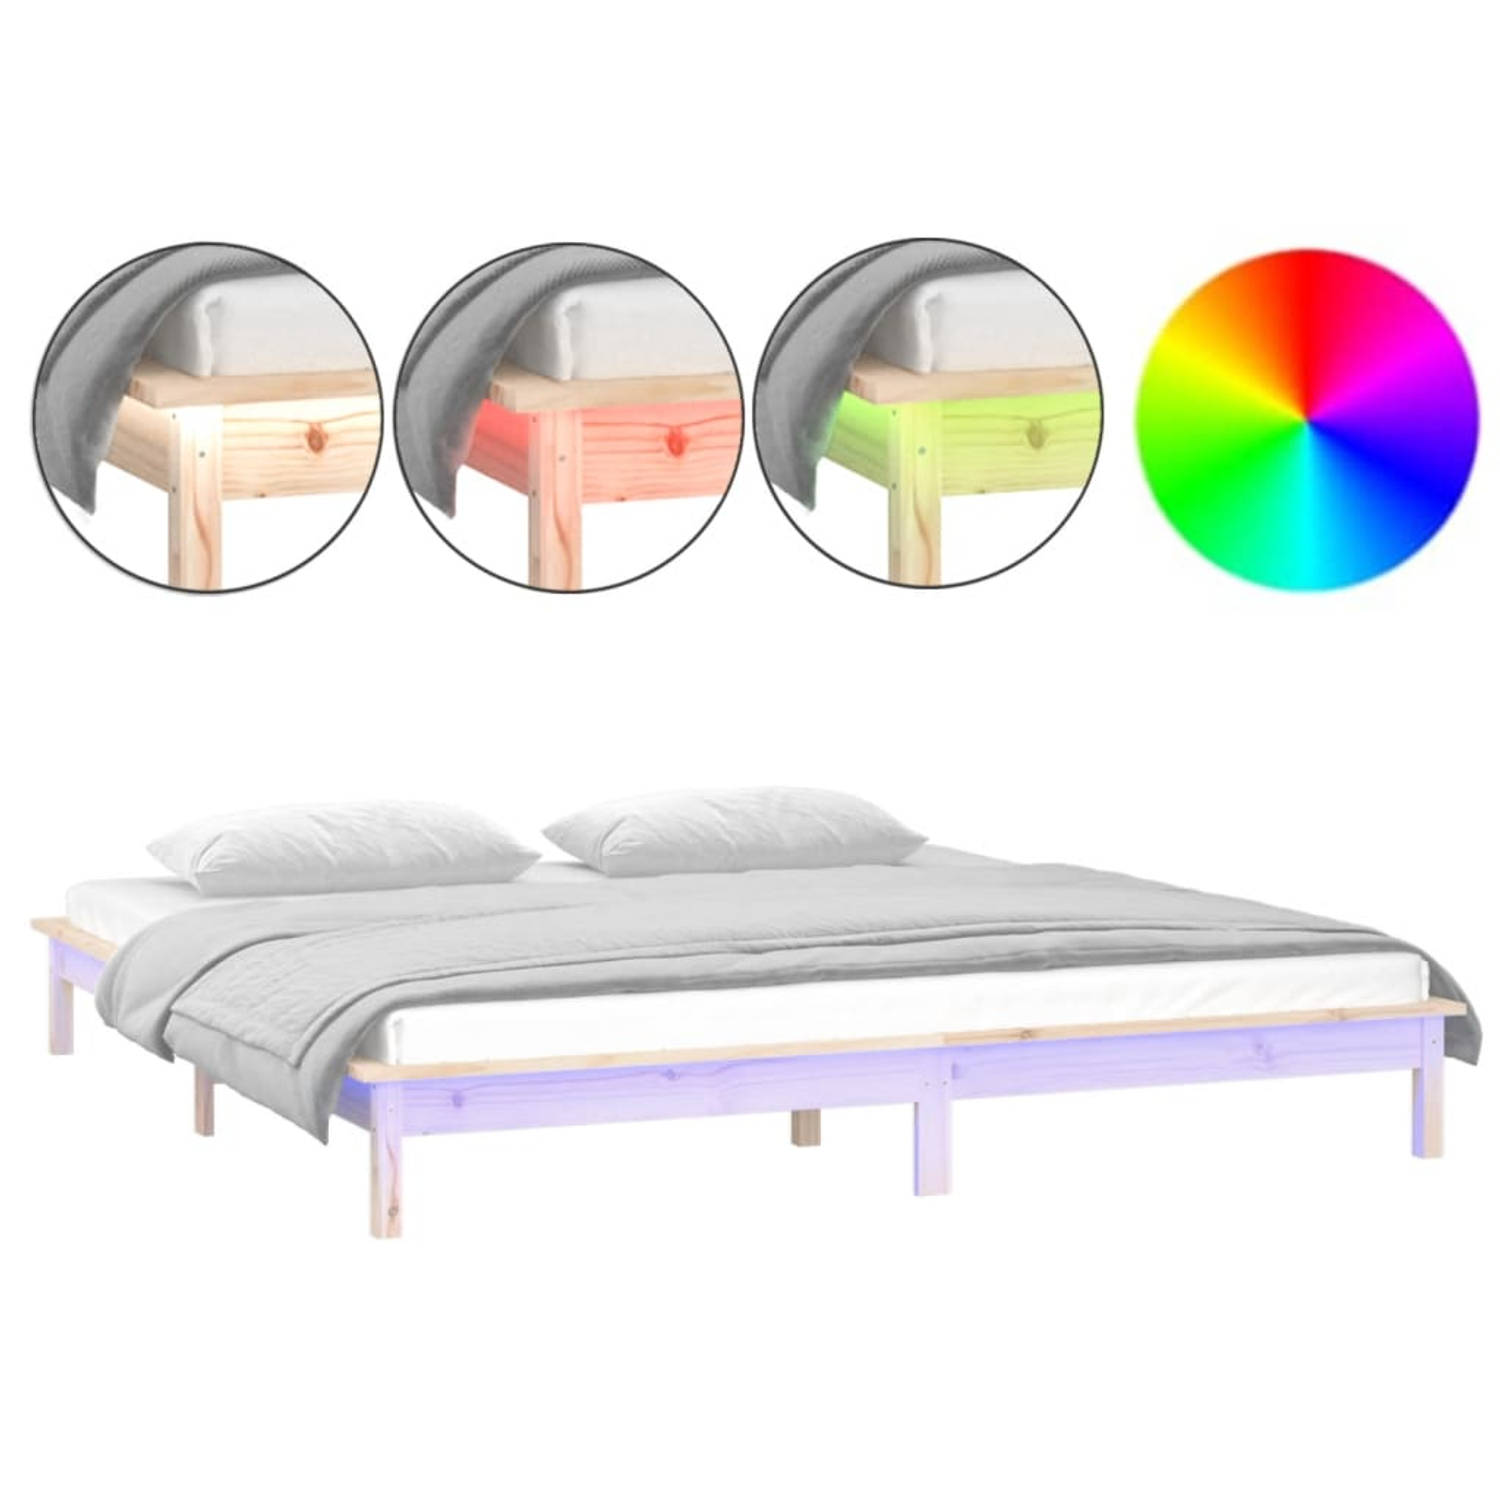 The Living Store Bed Frame - Houten LED-verlichting - 212 x 151.5 cm - Massief grenenhout